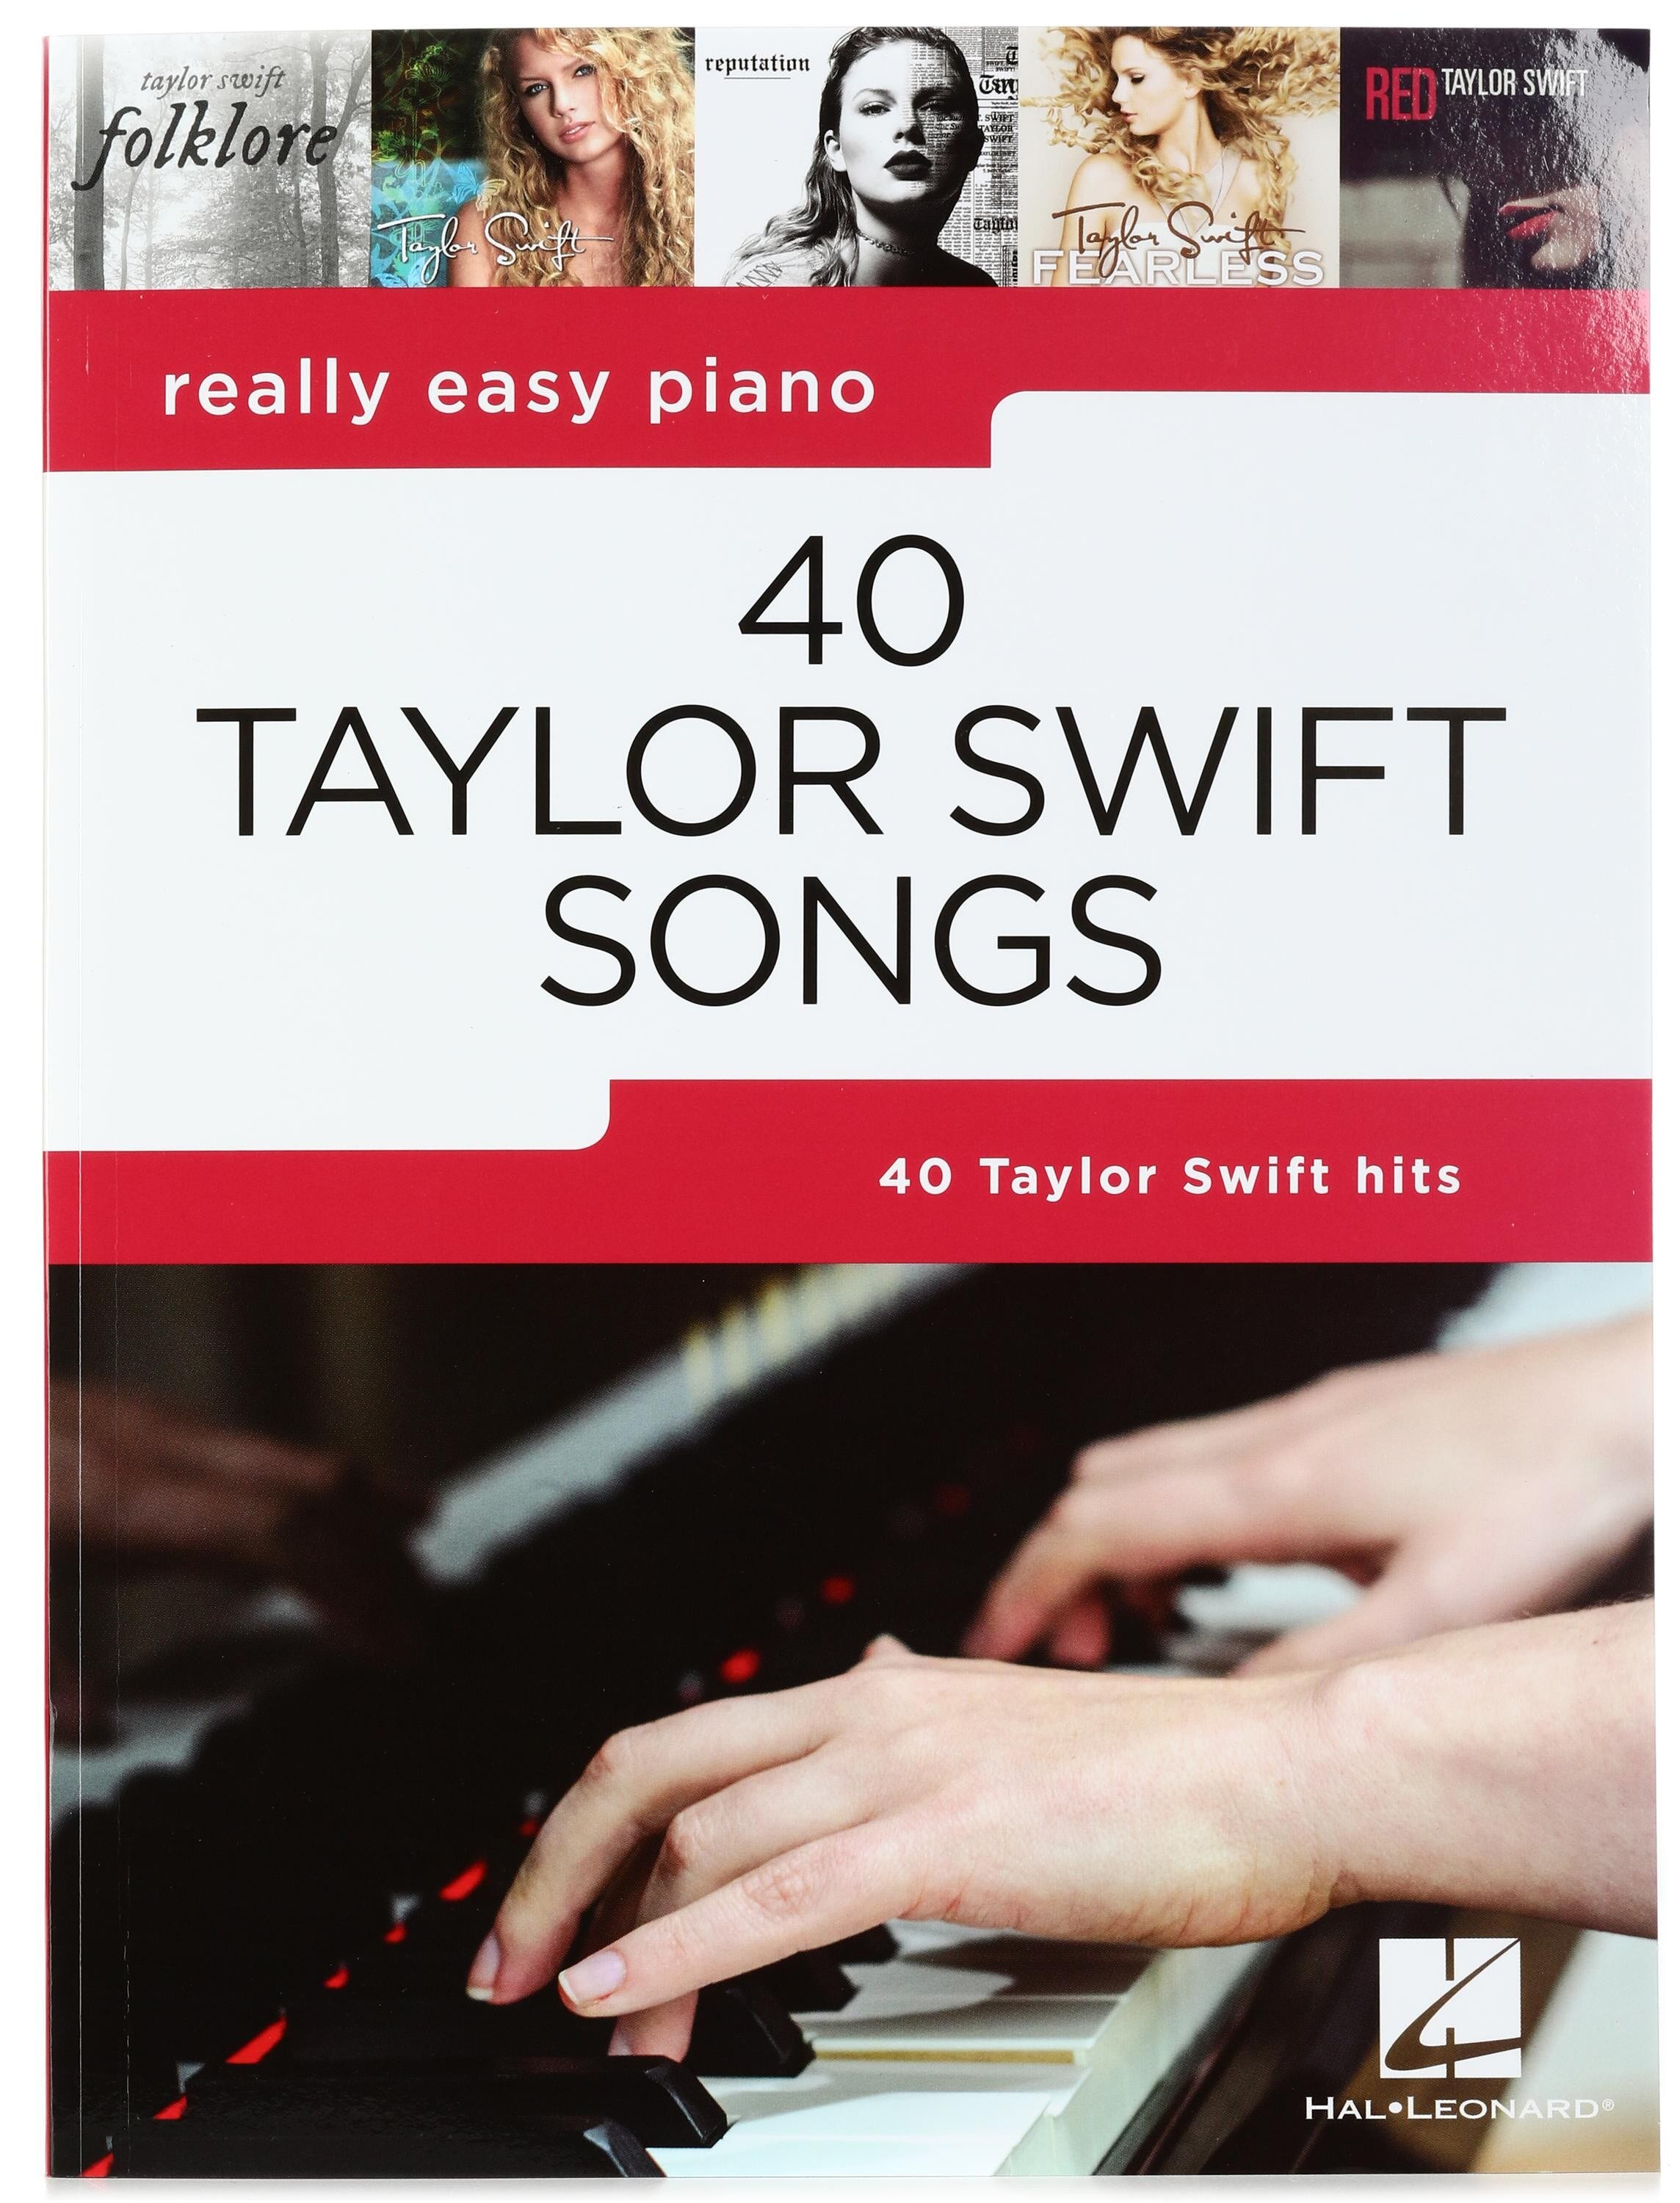 Taylor Swift Photo iPad Case Cover RED Album D